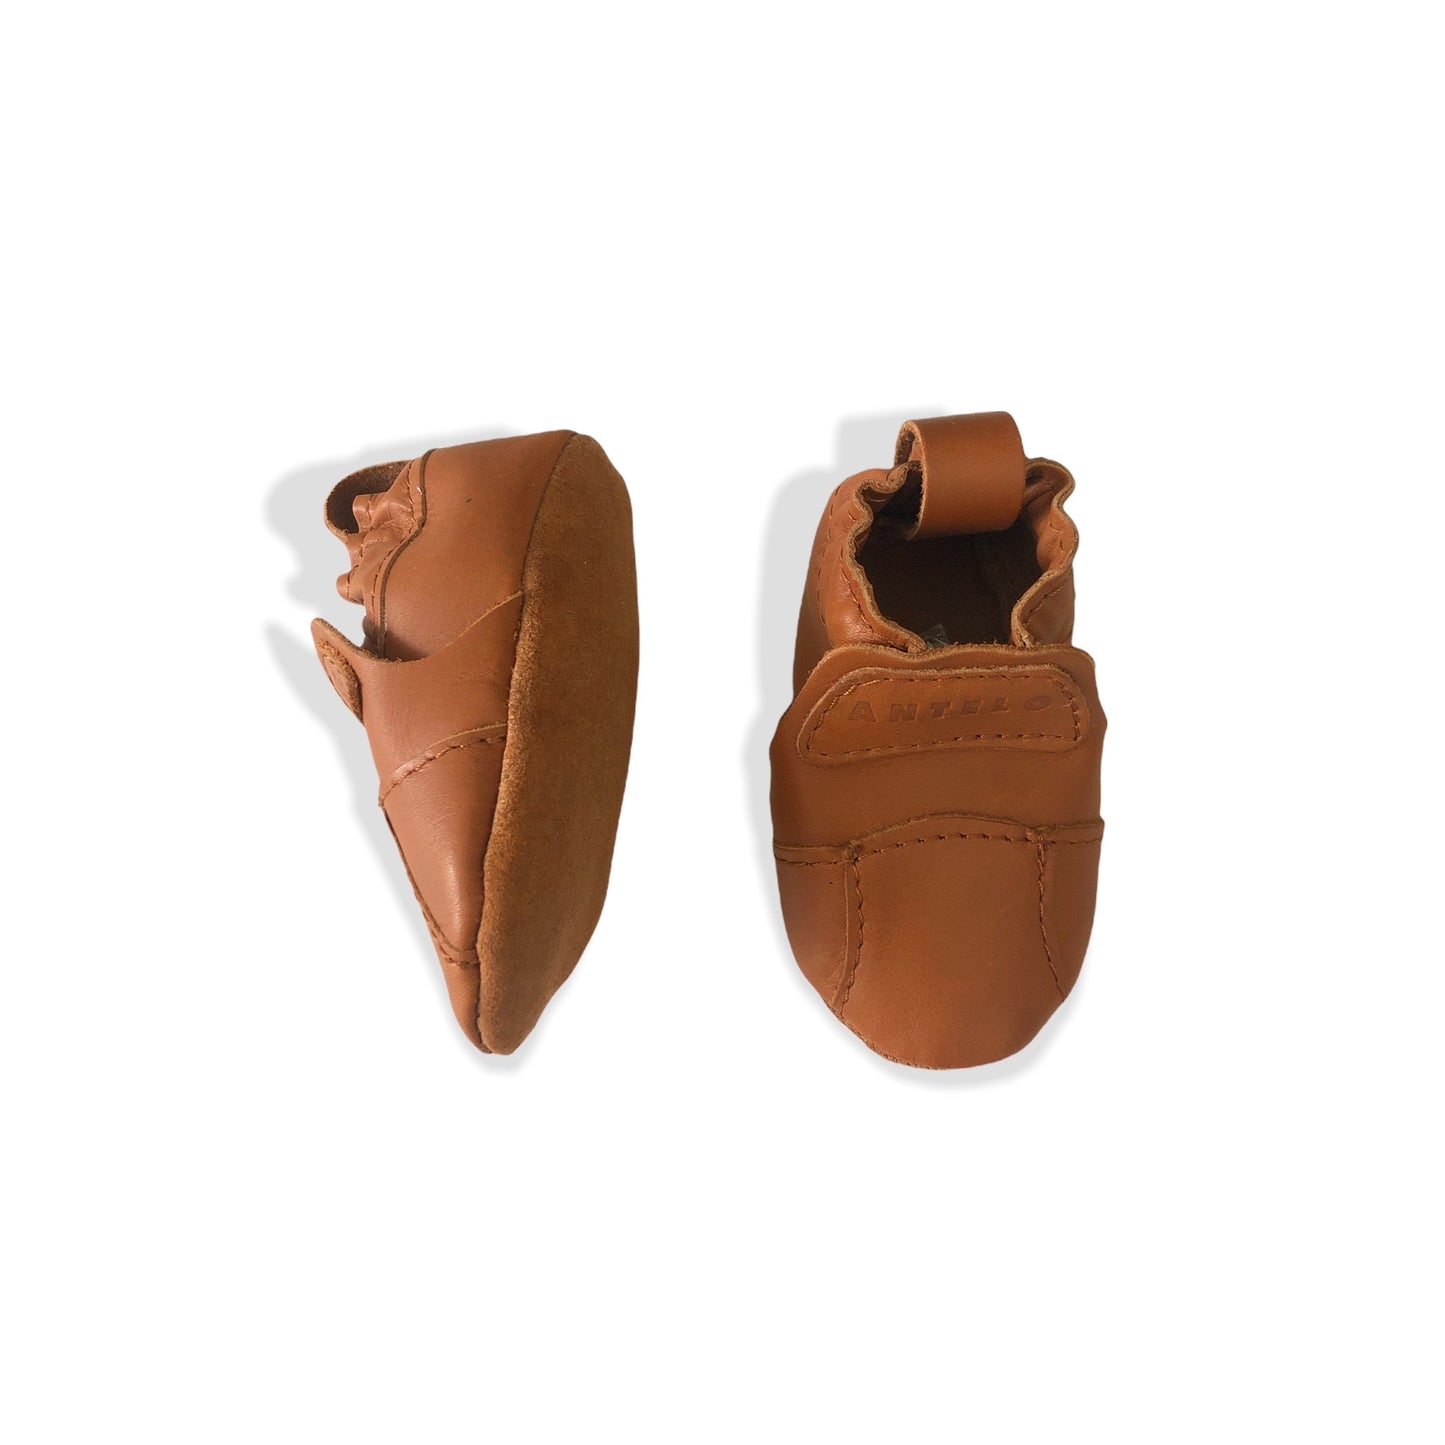 Reece leather baby shoes